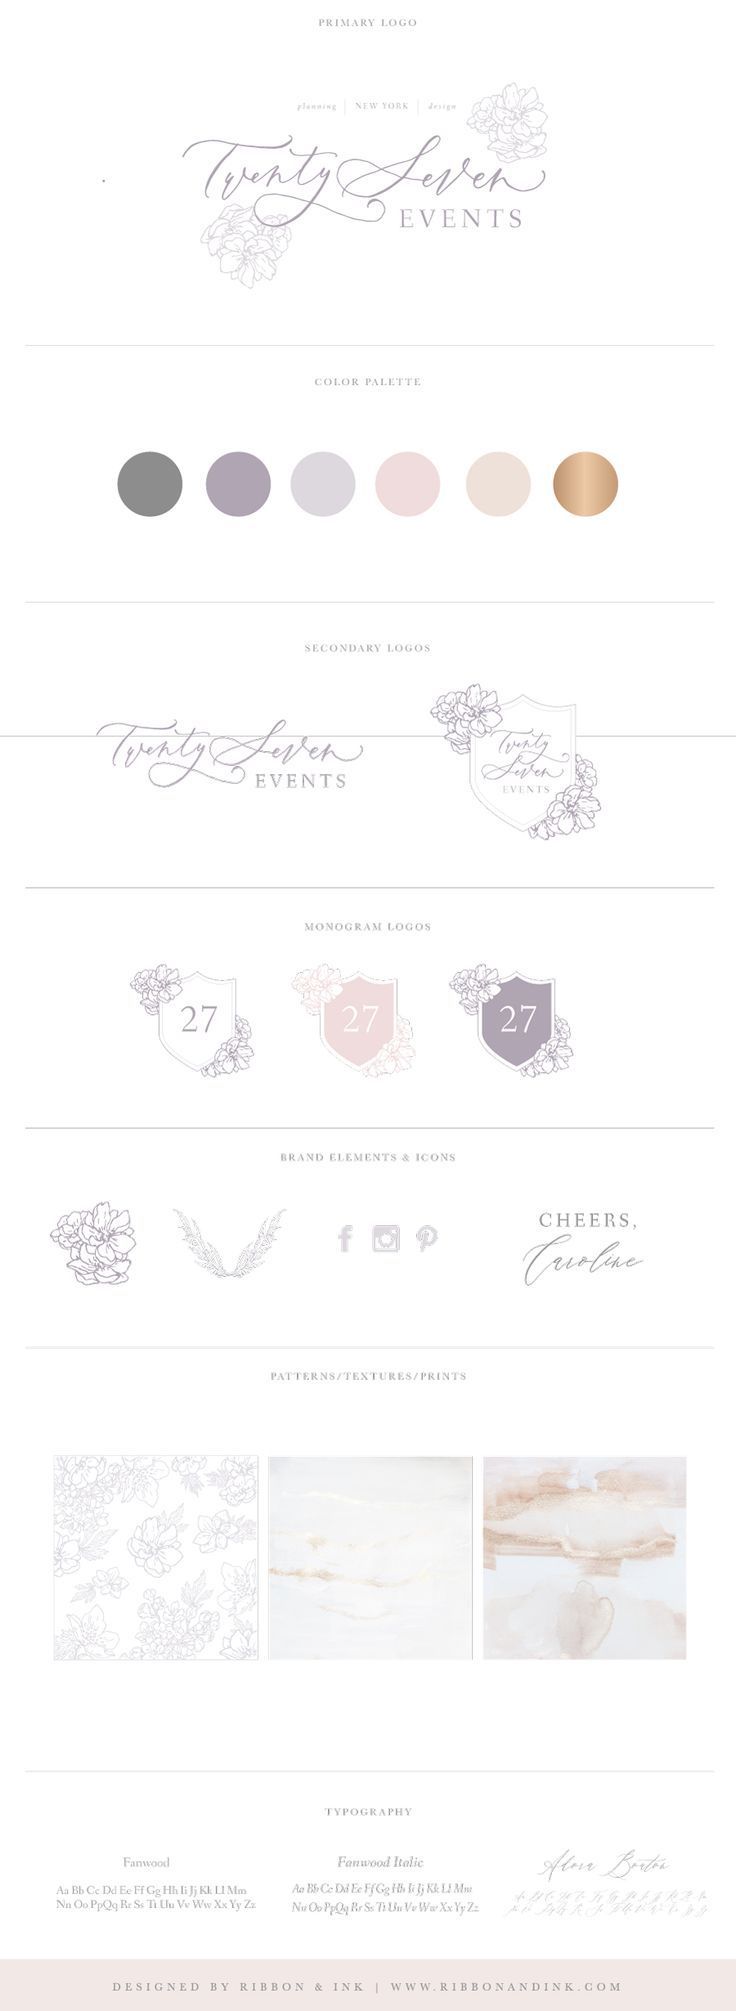 Brand Launch for New York Wedding Planner -   16 Event Planning Logo products
 ideas